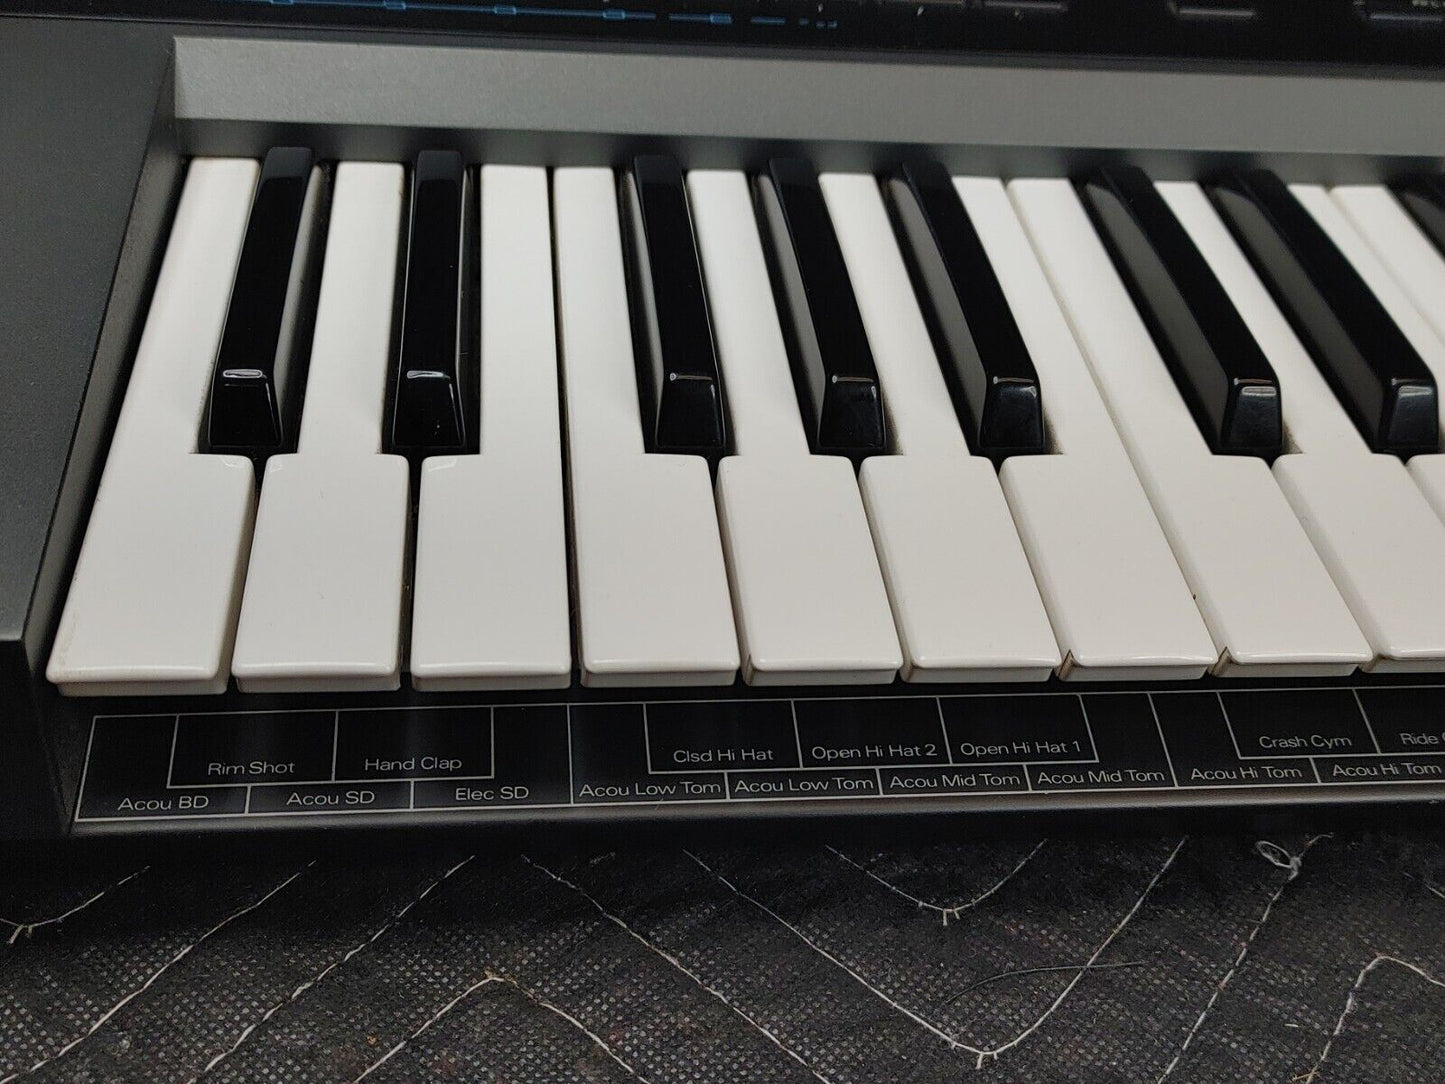 ROLAND PRO E Intelligent Arranger Keyboard w/ Manual and Music Style Card